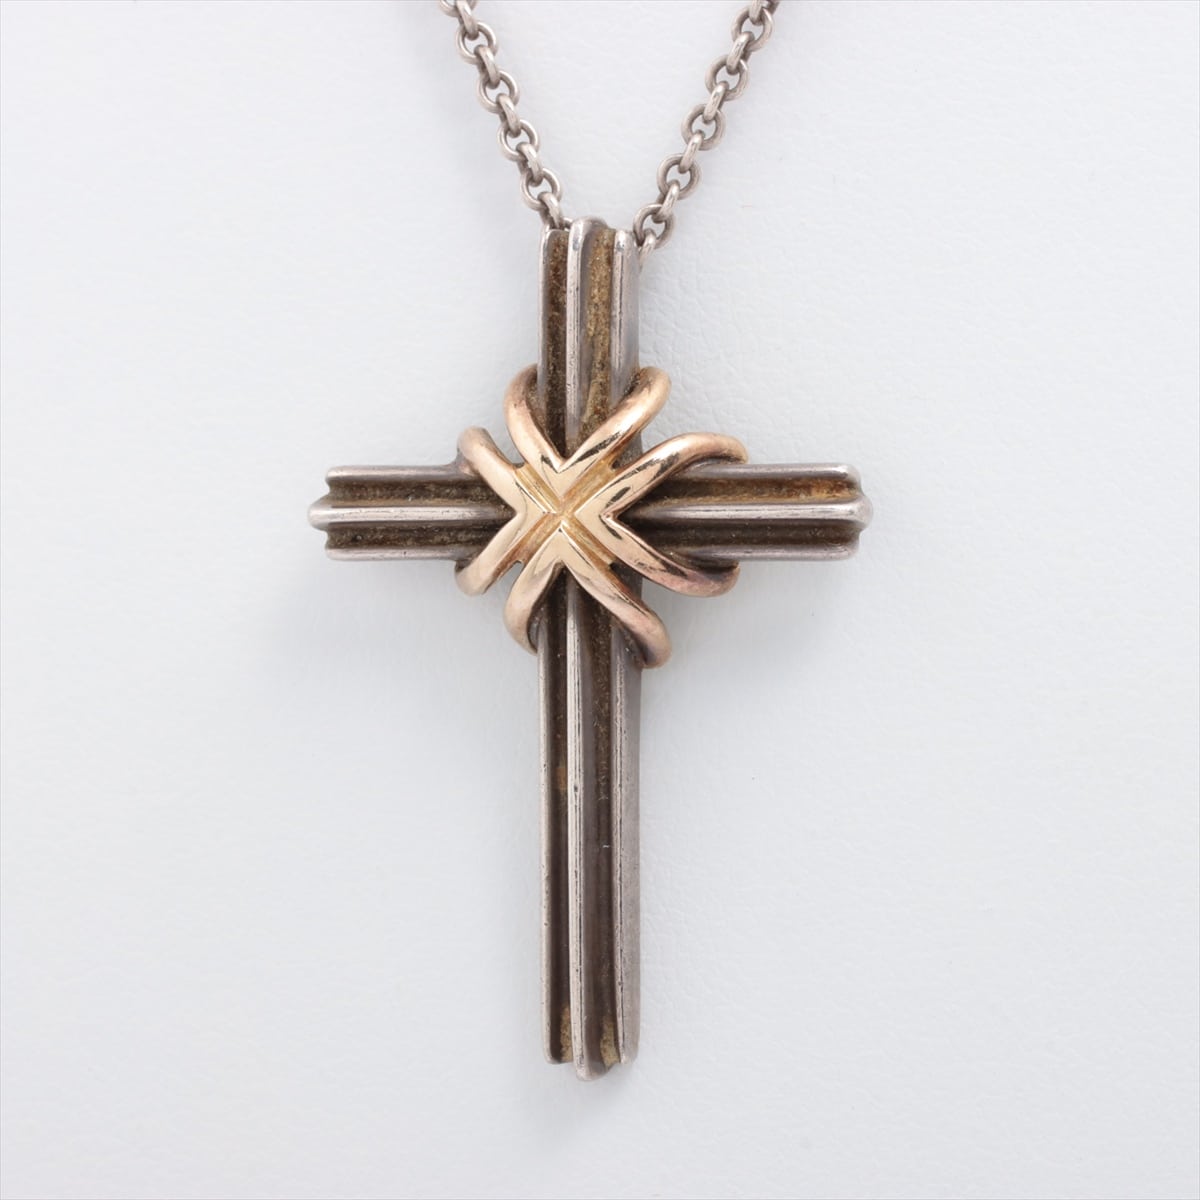 Tiffany Signature Cross Necklace 925×750 7.8g Gold × Silver